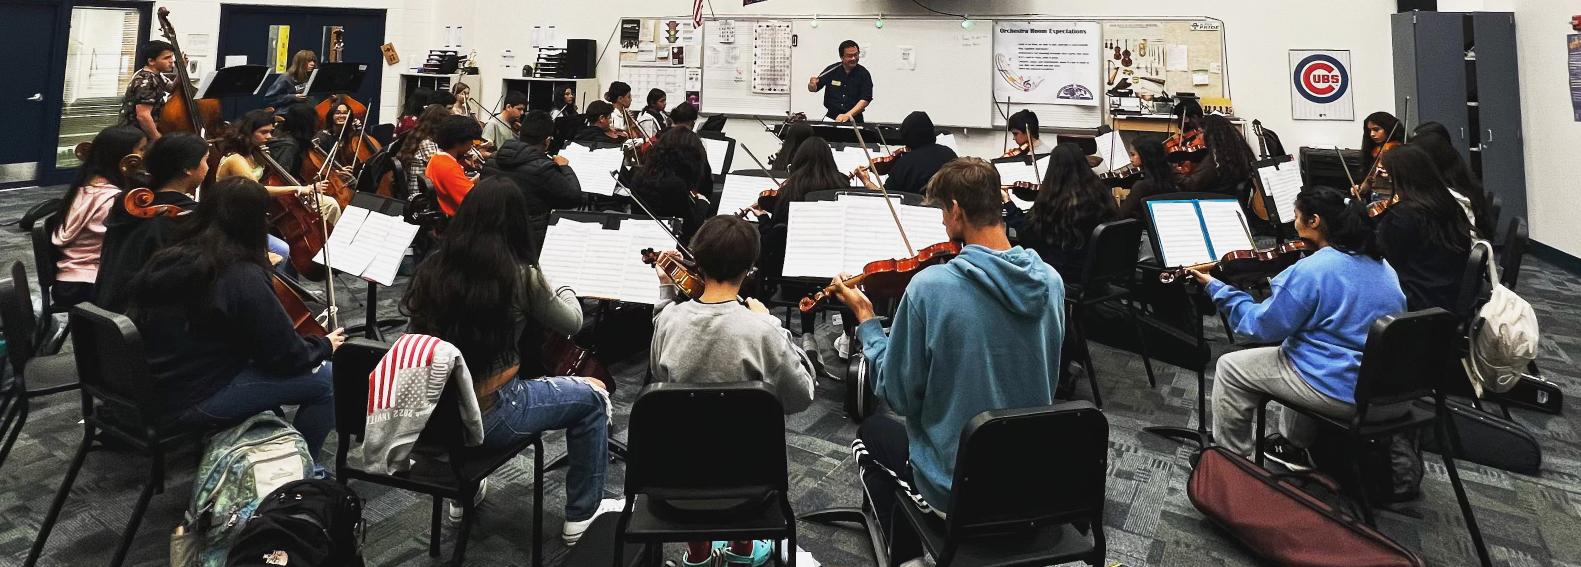 Addison Trail provides students with clinics led by professional musicians through Young People’s Music Initiative Grant